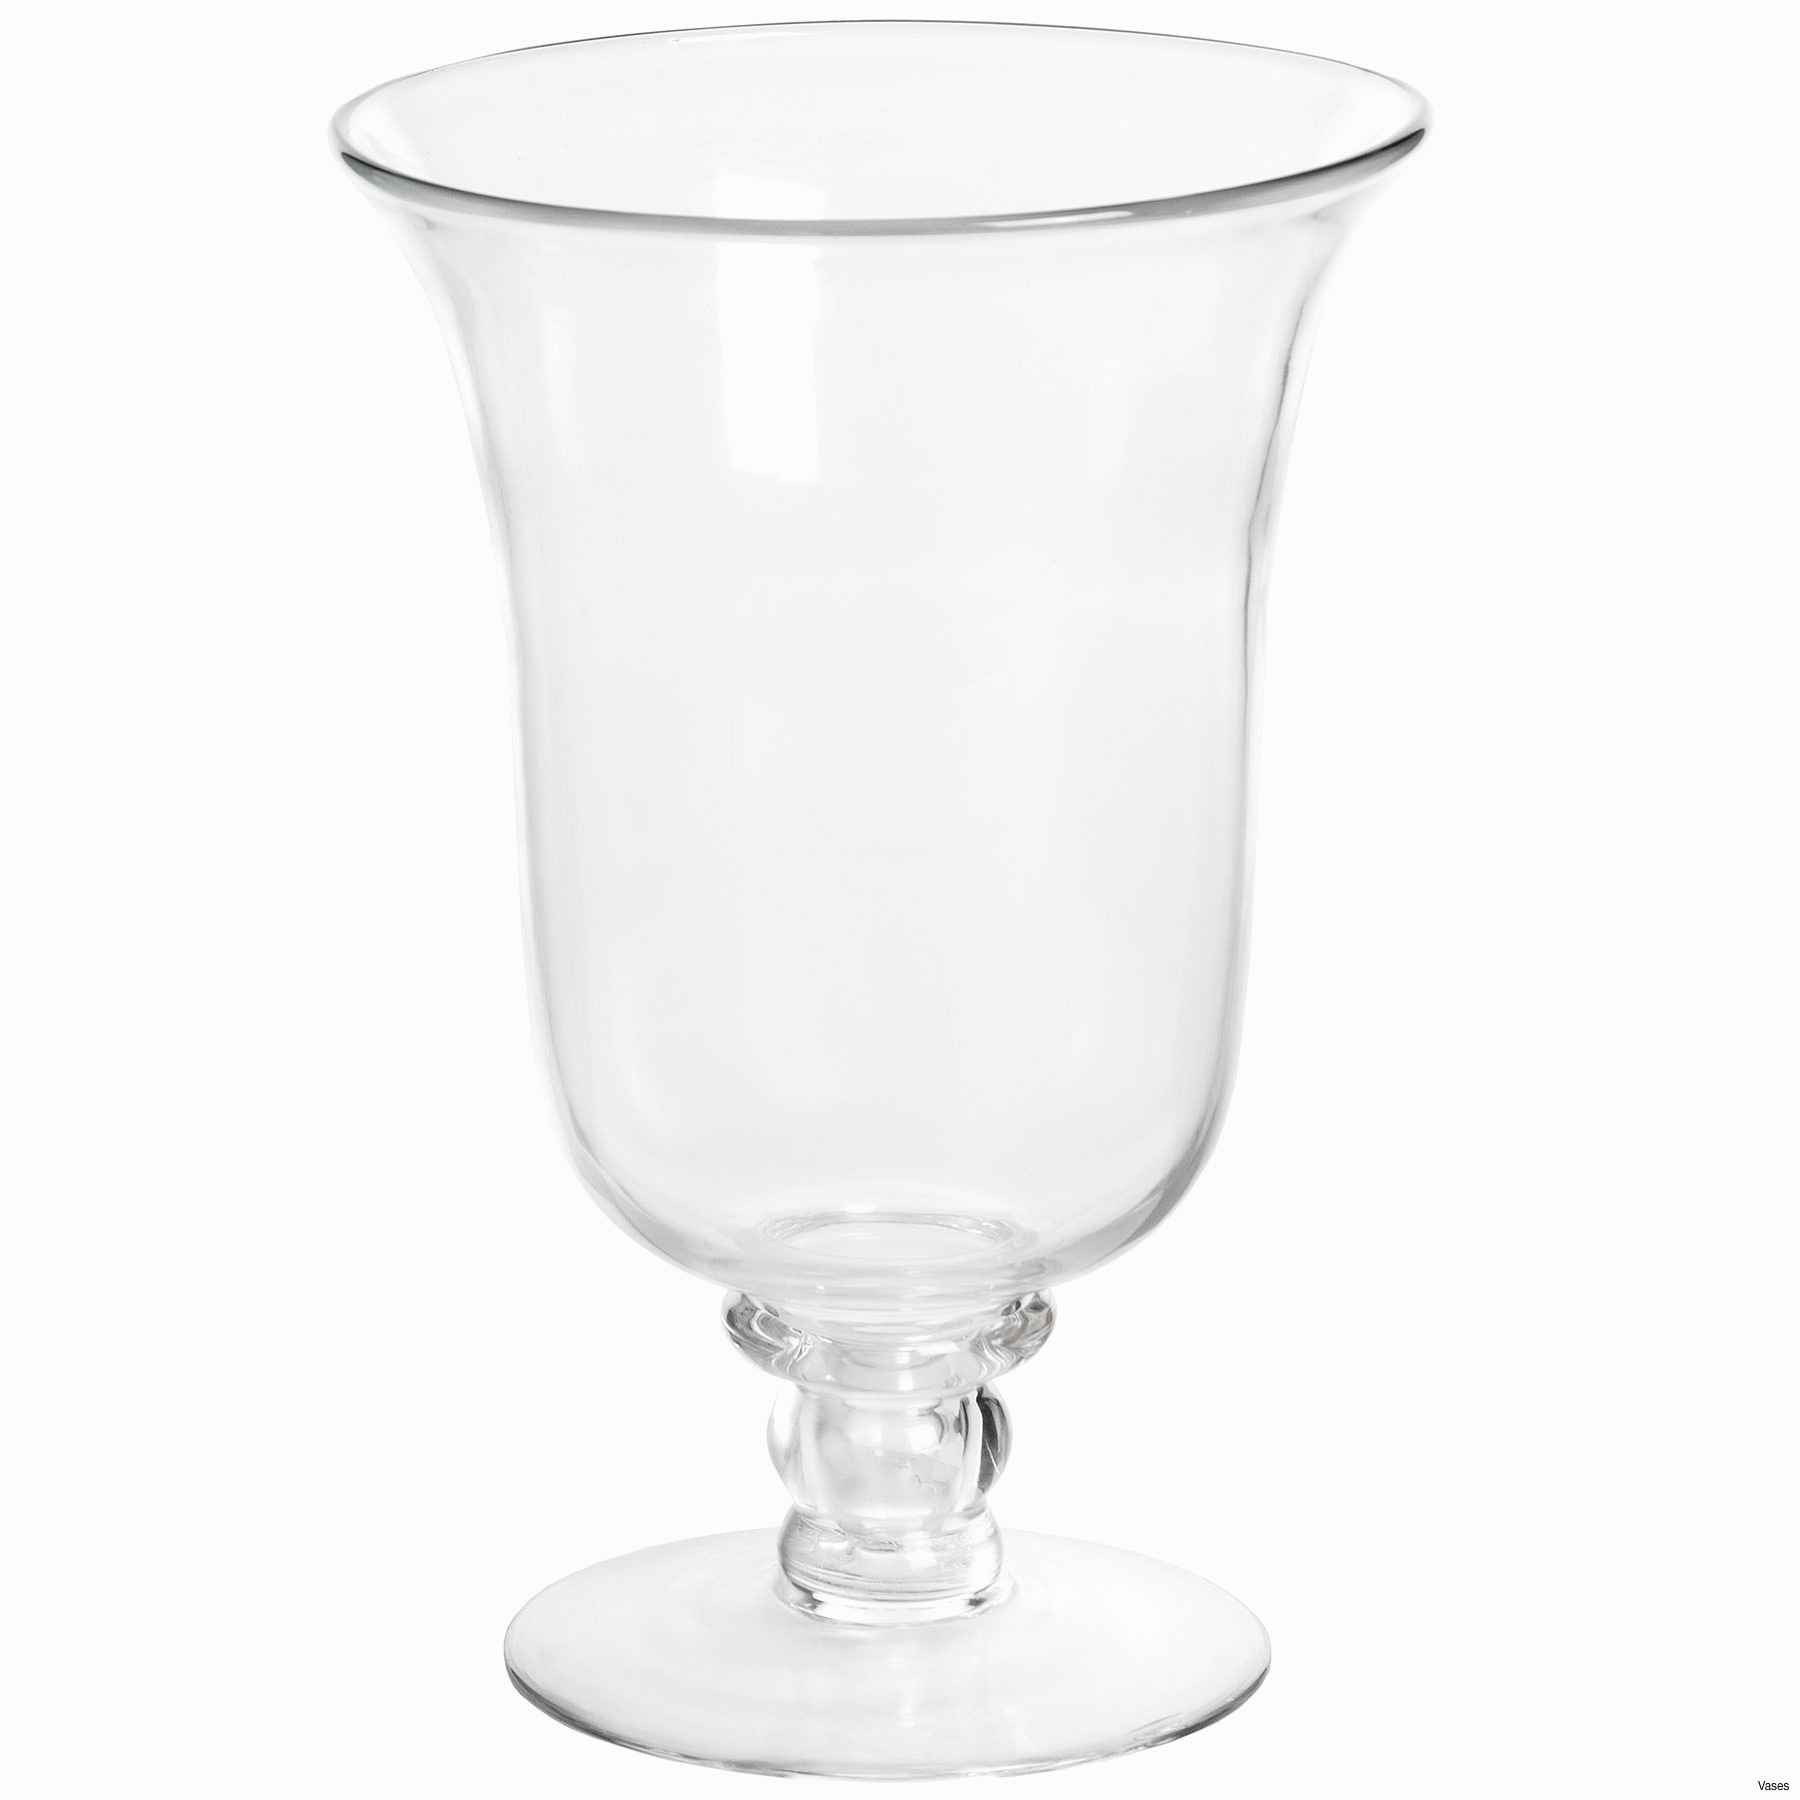 30 attractive Large Vase Candle Holder 2024 free download large vase candle holder of candle stands wholesale lovely faux crystal candle holders alive in candle stands wholesale lovely faux crystal candle holders alive vases gold tall jpgi 0d cheap